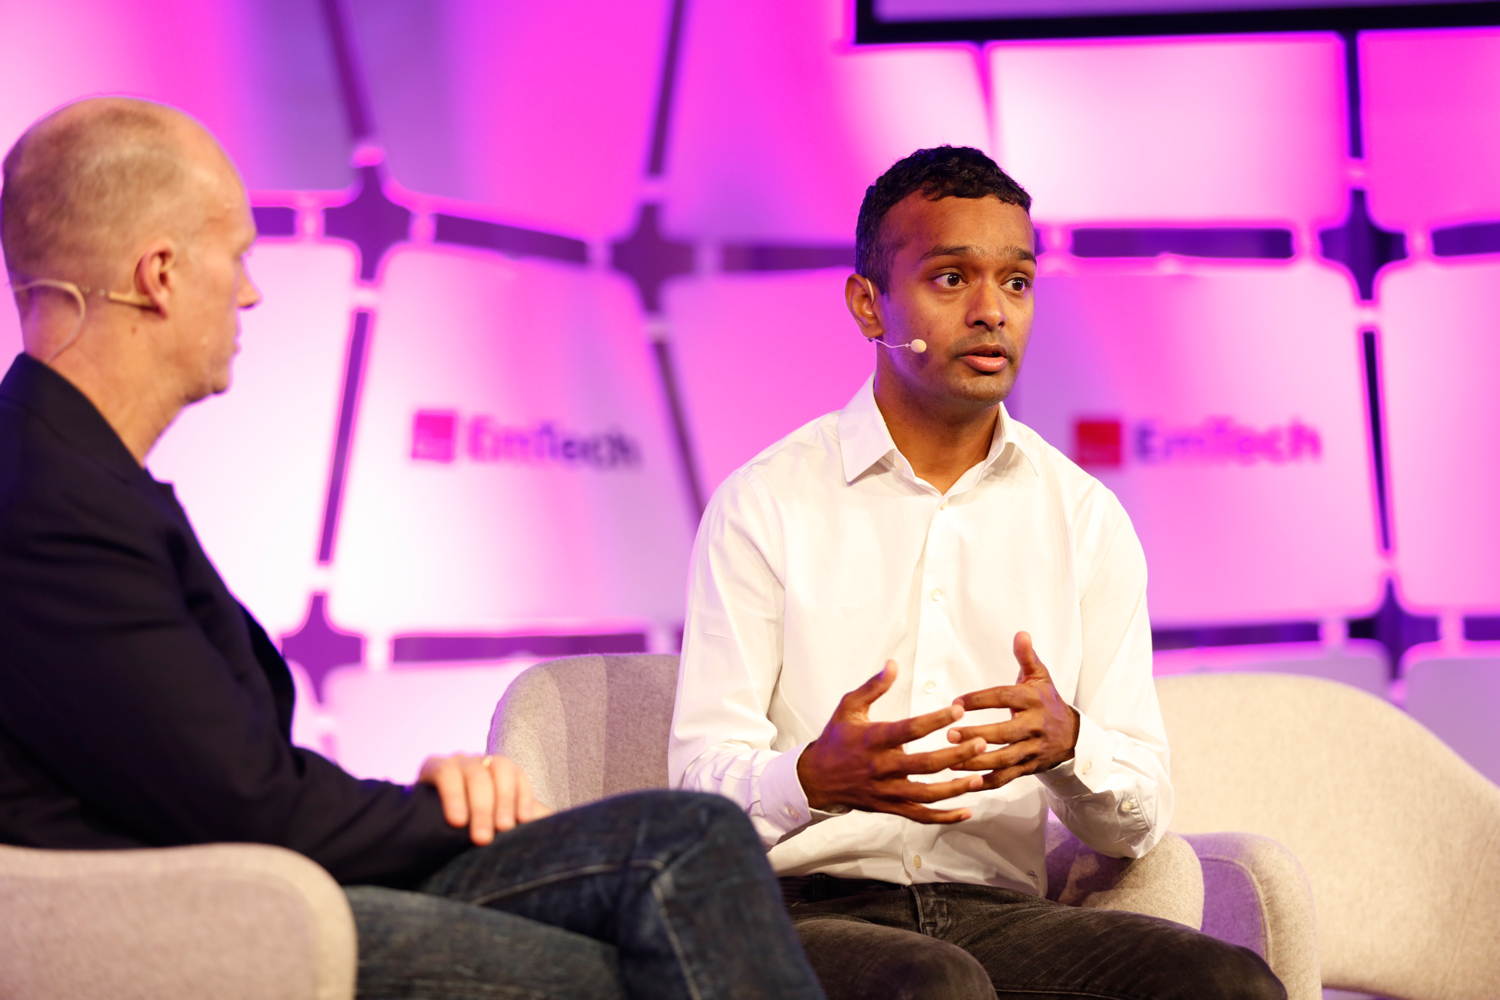 Shyam Gollakota, right, speaks with MIT Technology Review's Editor-in-Chief Jason Pontin.